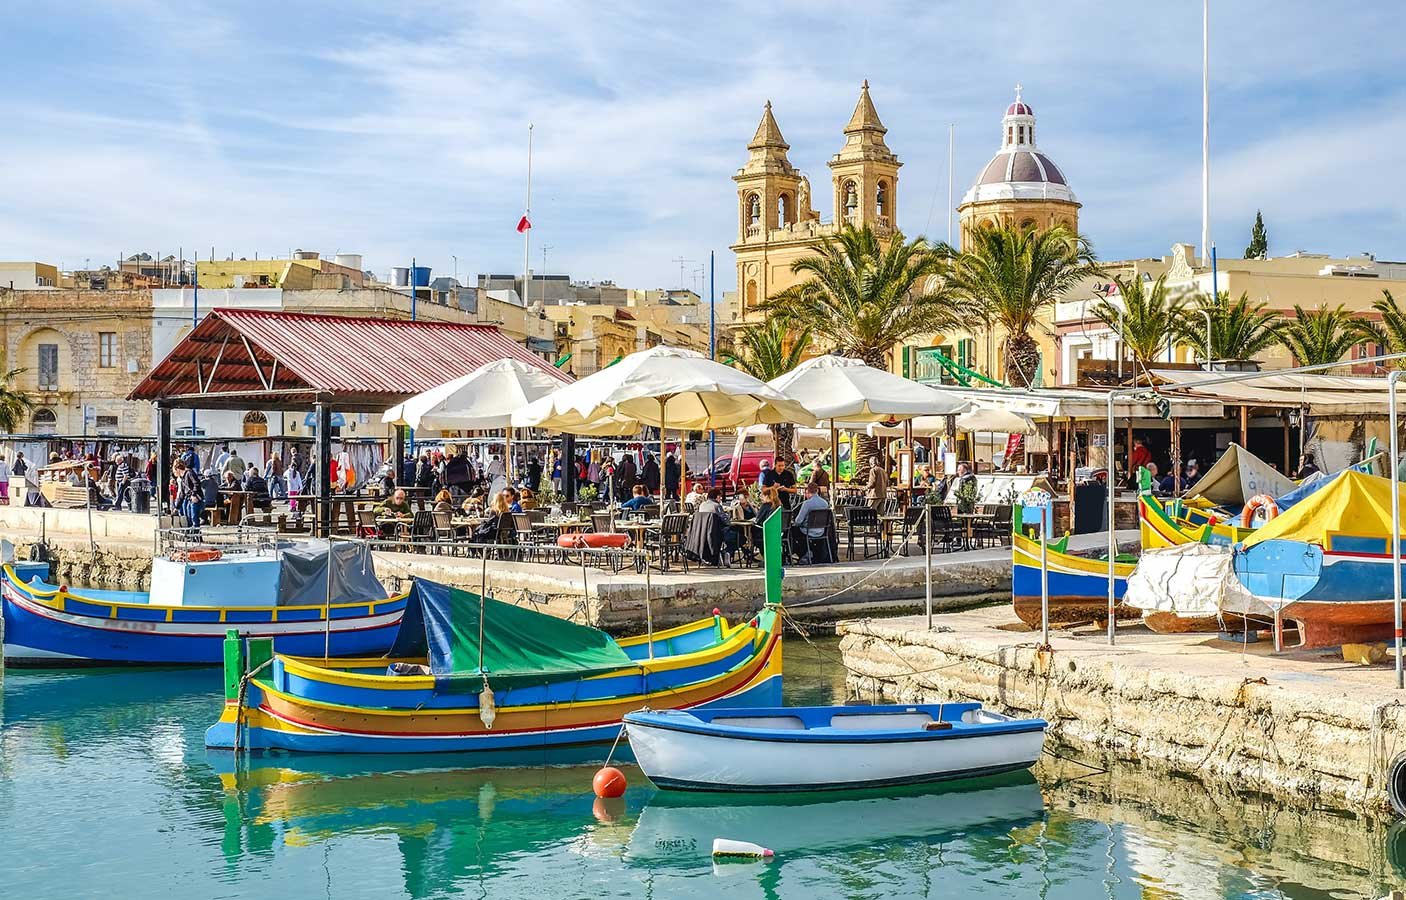 Why Malta is a great solo travel destination / Malta Solo Budget Travel Guide / Things to do in Malta